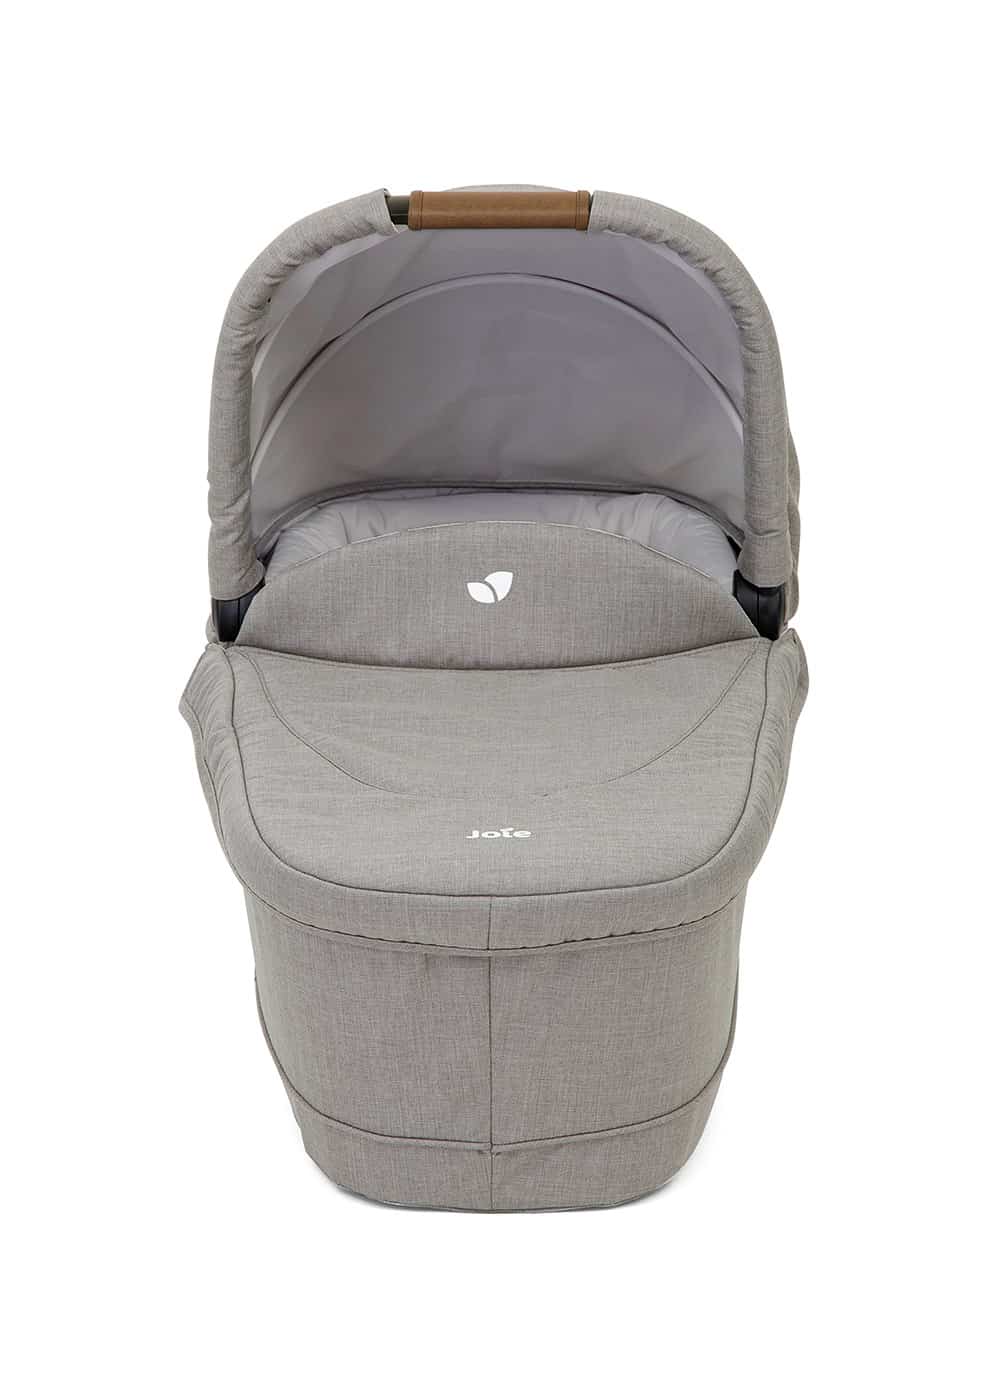 Joie Ramble™ XL Carrycot – Grey Flannel